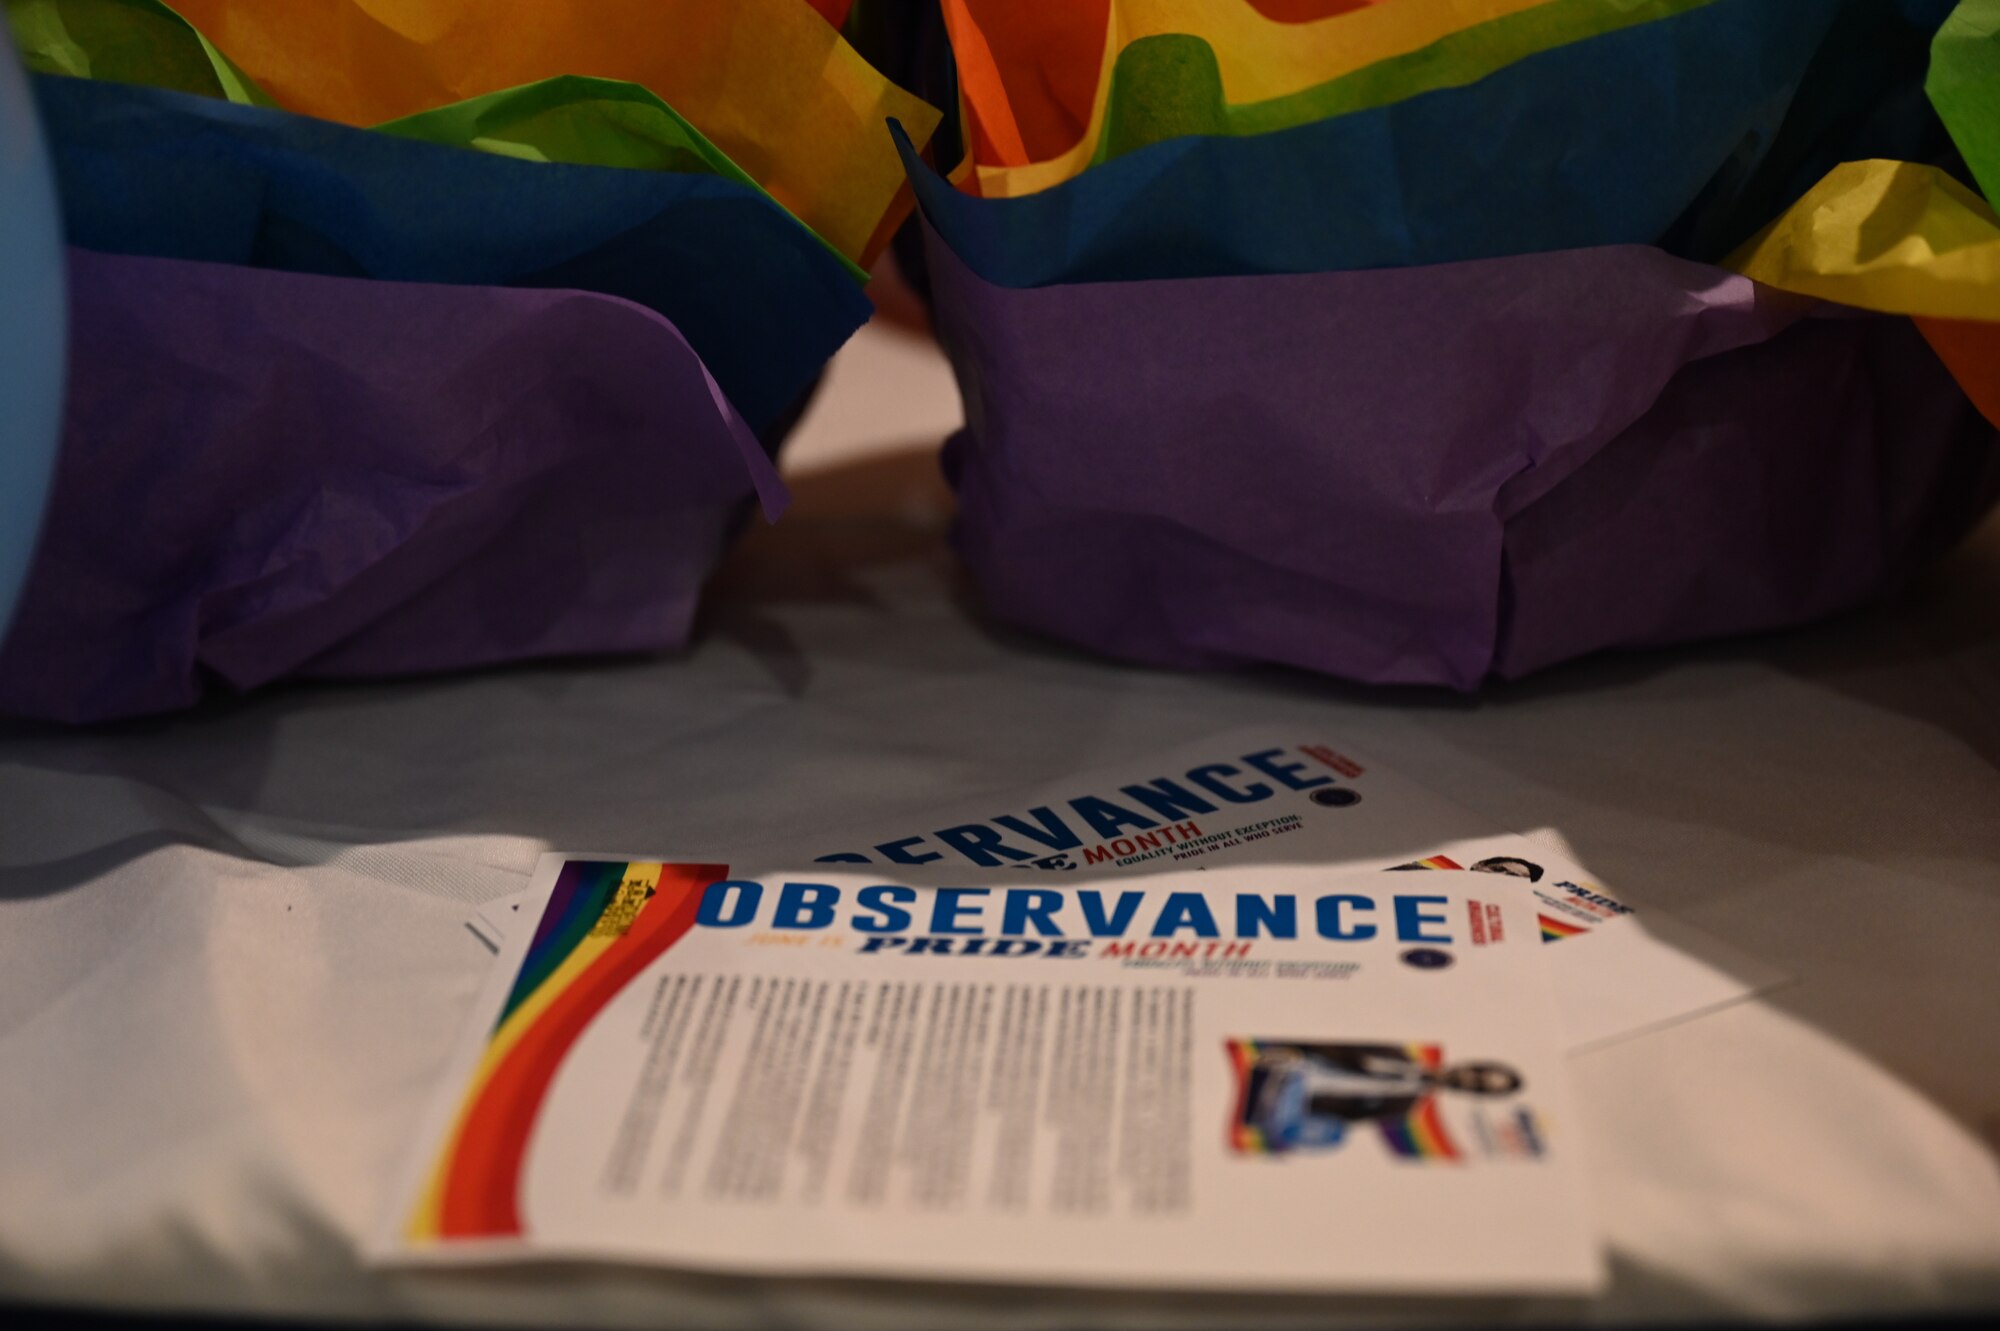 A Pride Month observance flier is displayed on a table during the keynote speaker event held at Altus Air Force Base, Oklahoma, June 5, 2023. The event was held to showcase the stories and perspectives of U.S. Space Force Lt. Col Bree Fram, astronautical engineer, as one of the highest ranking, openly transgender officers in the U.S. military. (U.S. Air Force photo by Airman 1st Class Heidi Bucins).